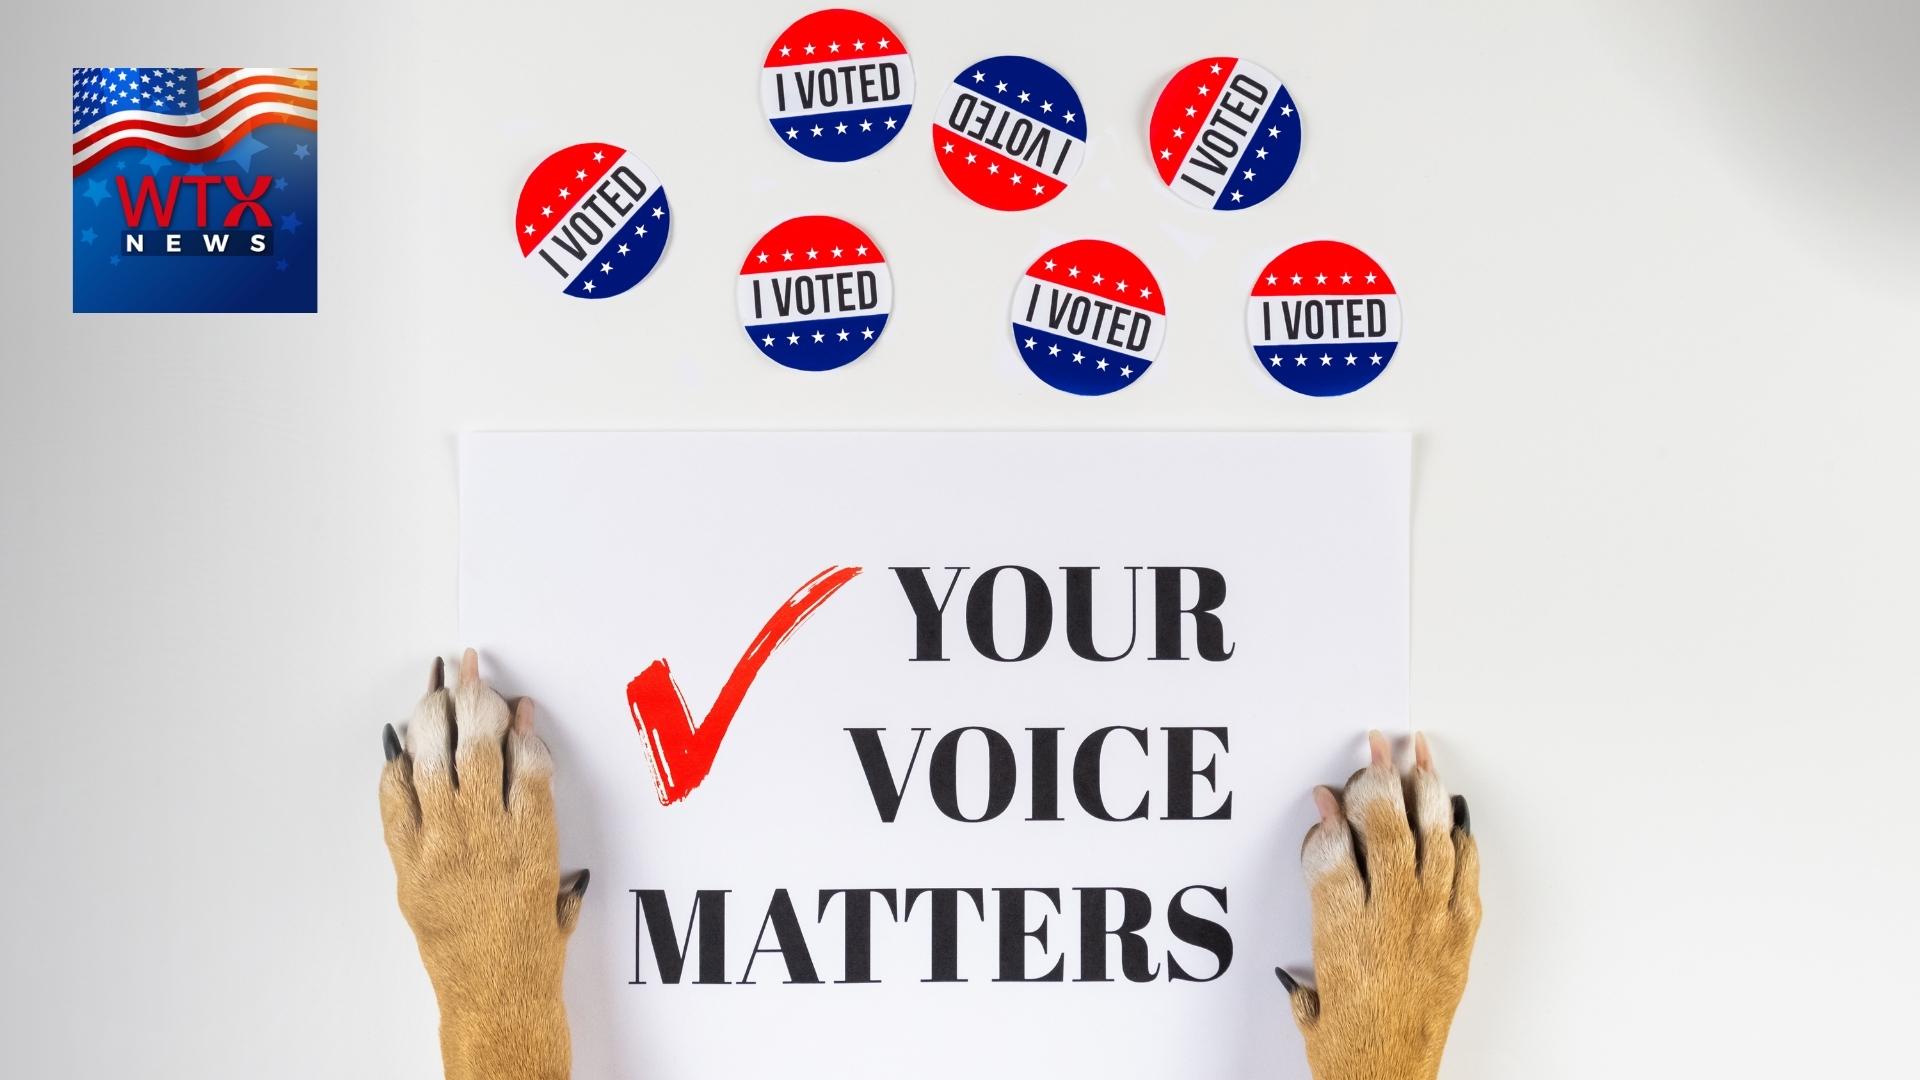 your voice matters - WTX News Breaking News, fashion & Culture from around the World - Daily News Briefings -Finance, Business, Politics & Sports